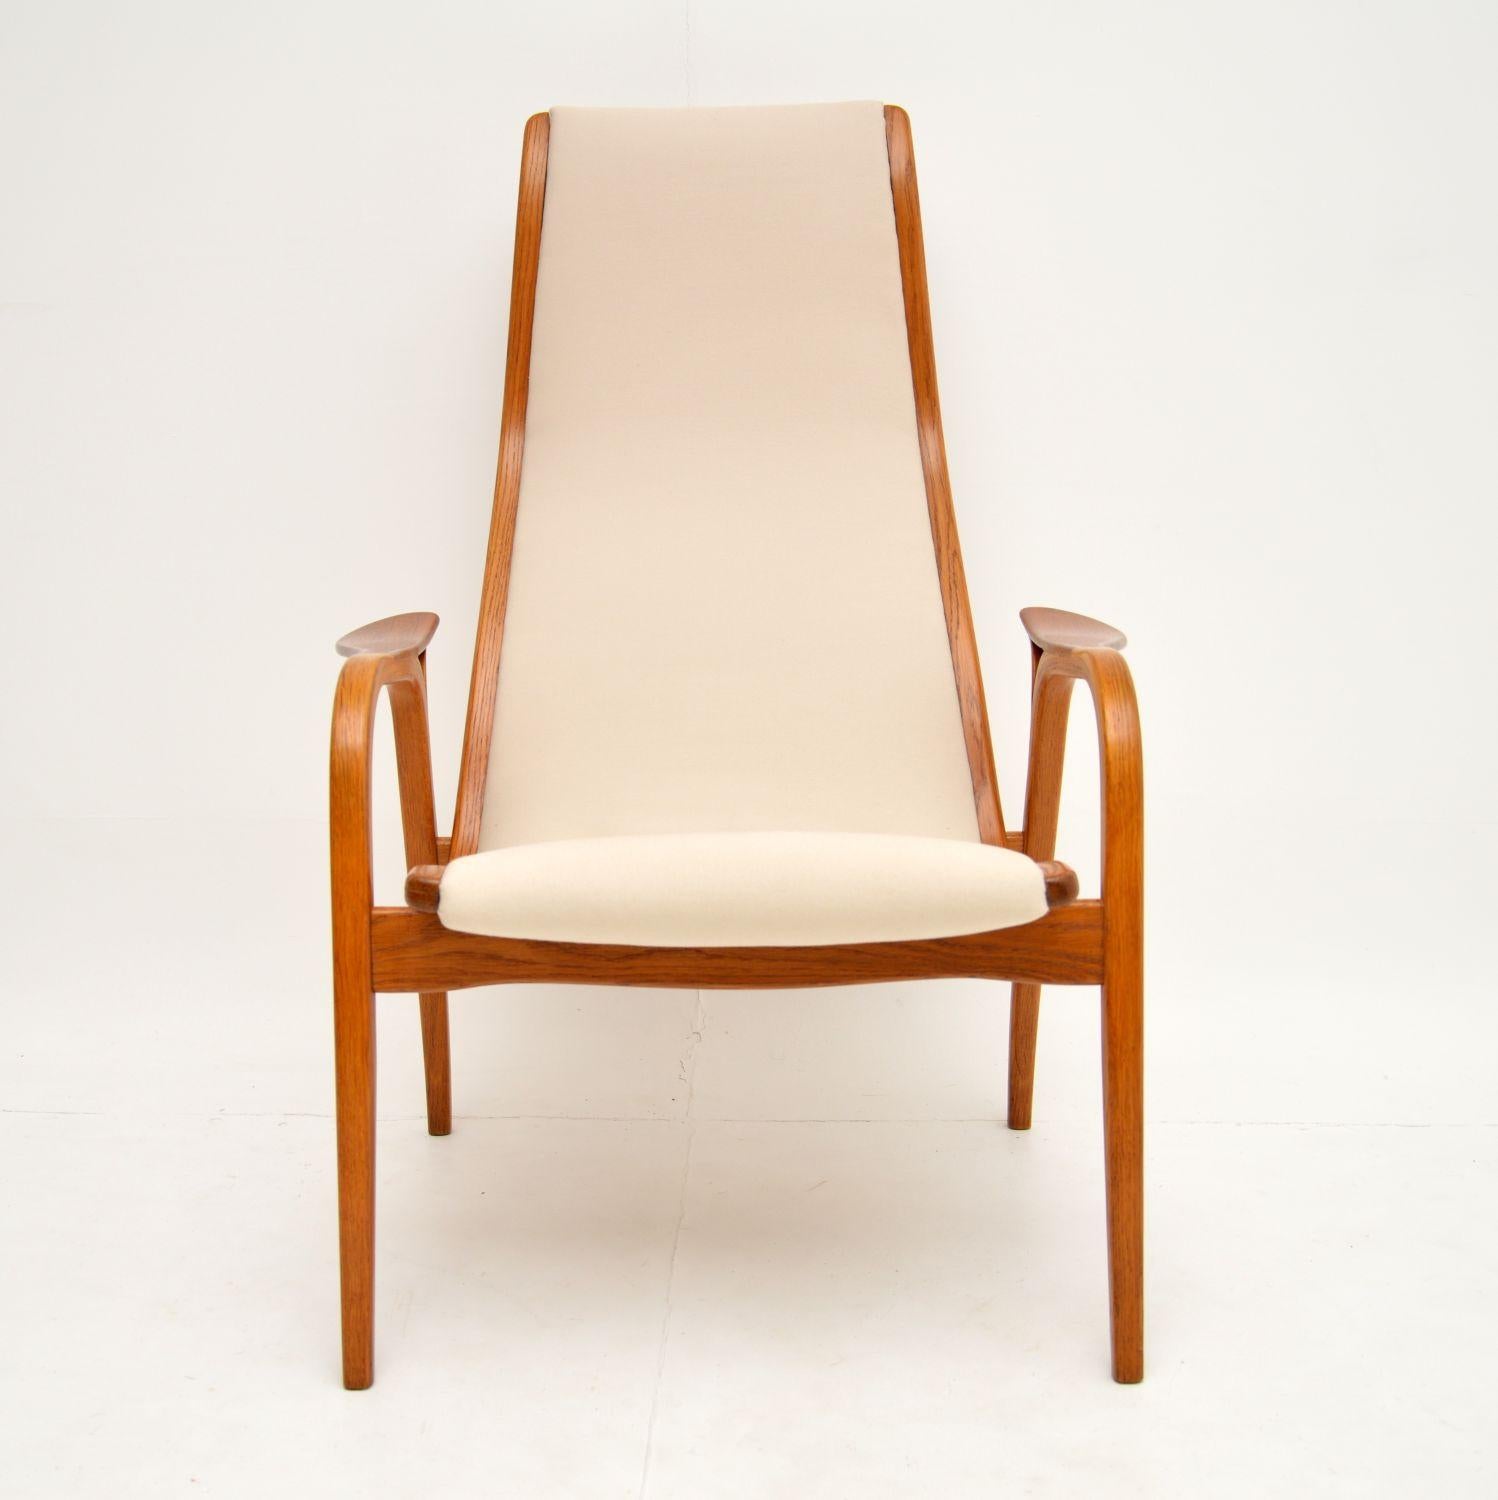 A stunning and iconic armchair, this is the Lamino chair. It was designed by Yngve Ekstrom and made by Swedese in Sweden, it dates from the 1960s-1970s.

We have had this fully restored and it is in superb condition throughout. The teak frame has